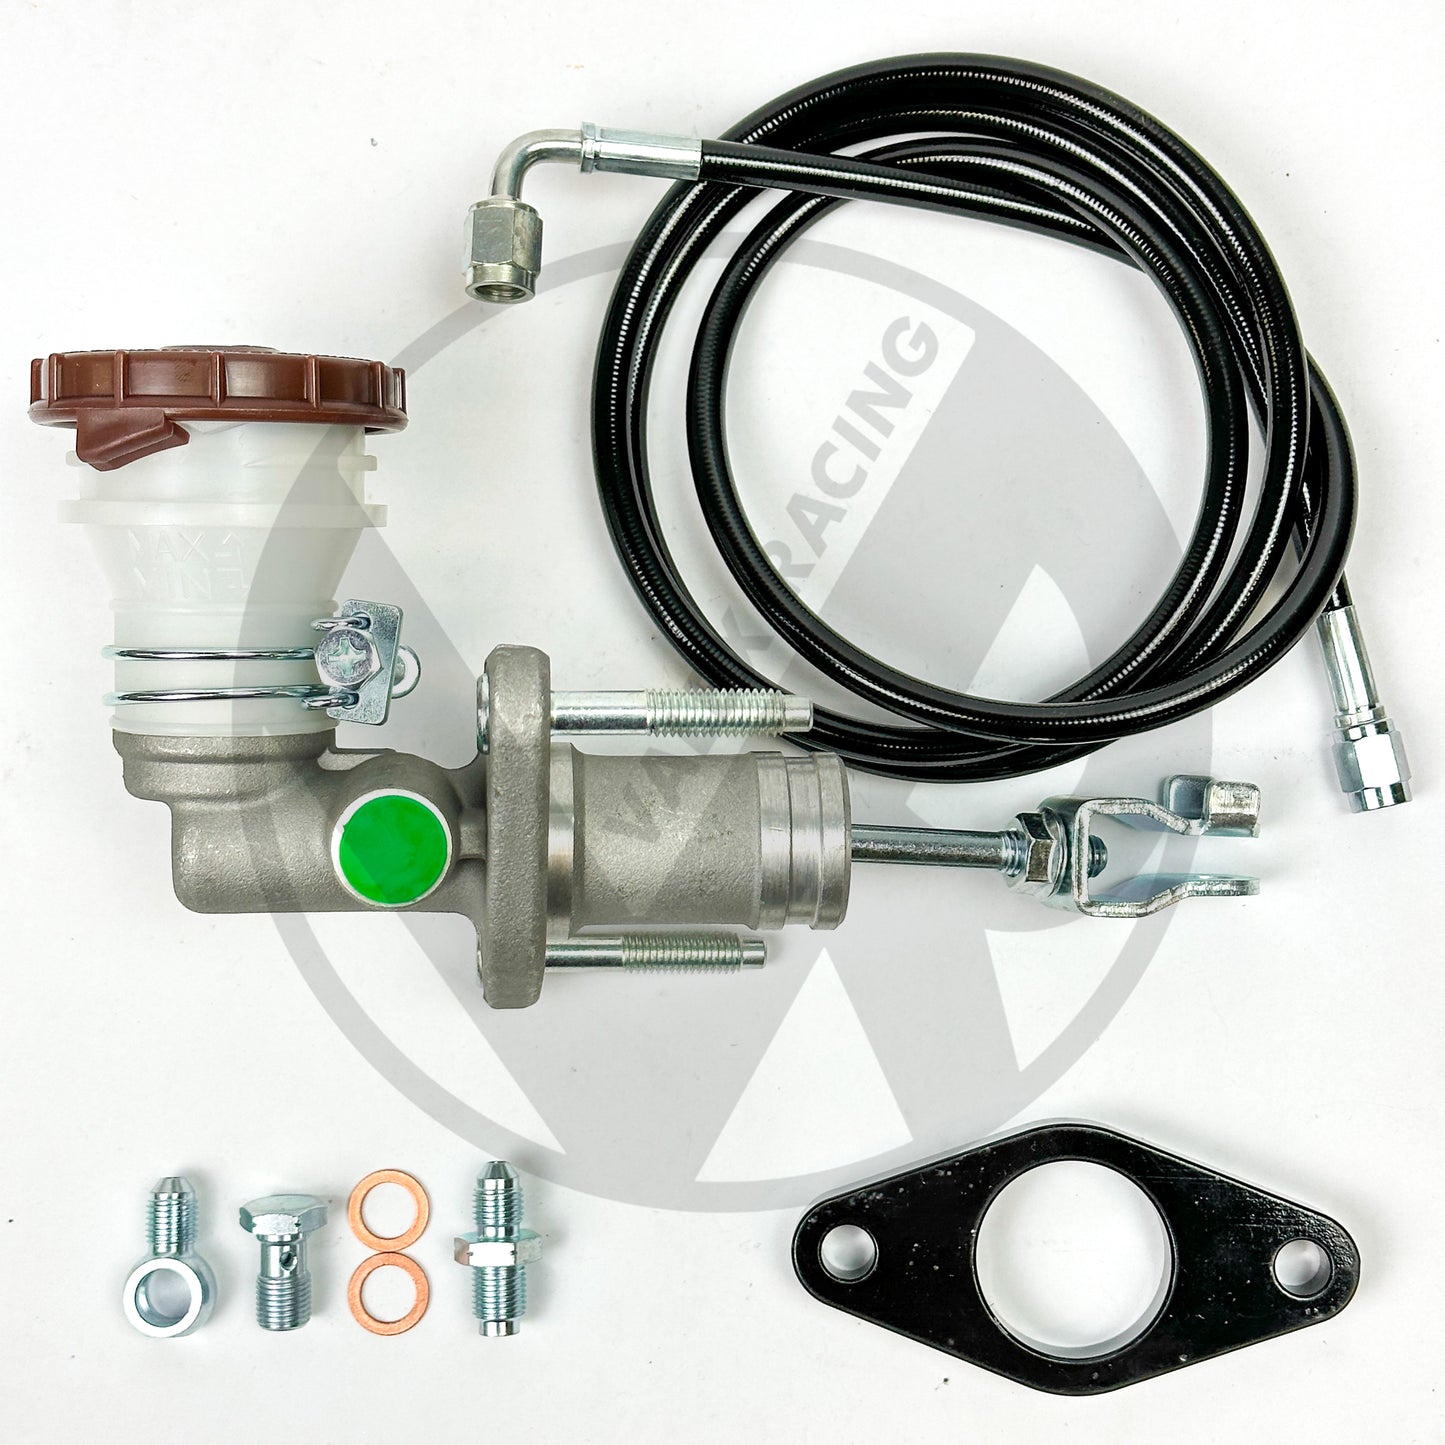 K Swap S2000 (S2K) Style Clutch Master Cylinder (CMC) Kit with Stainless Steel Clutch Line